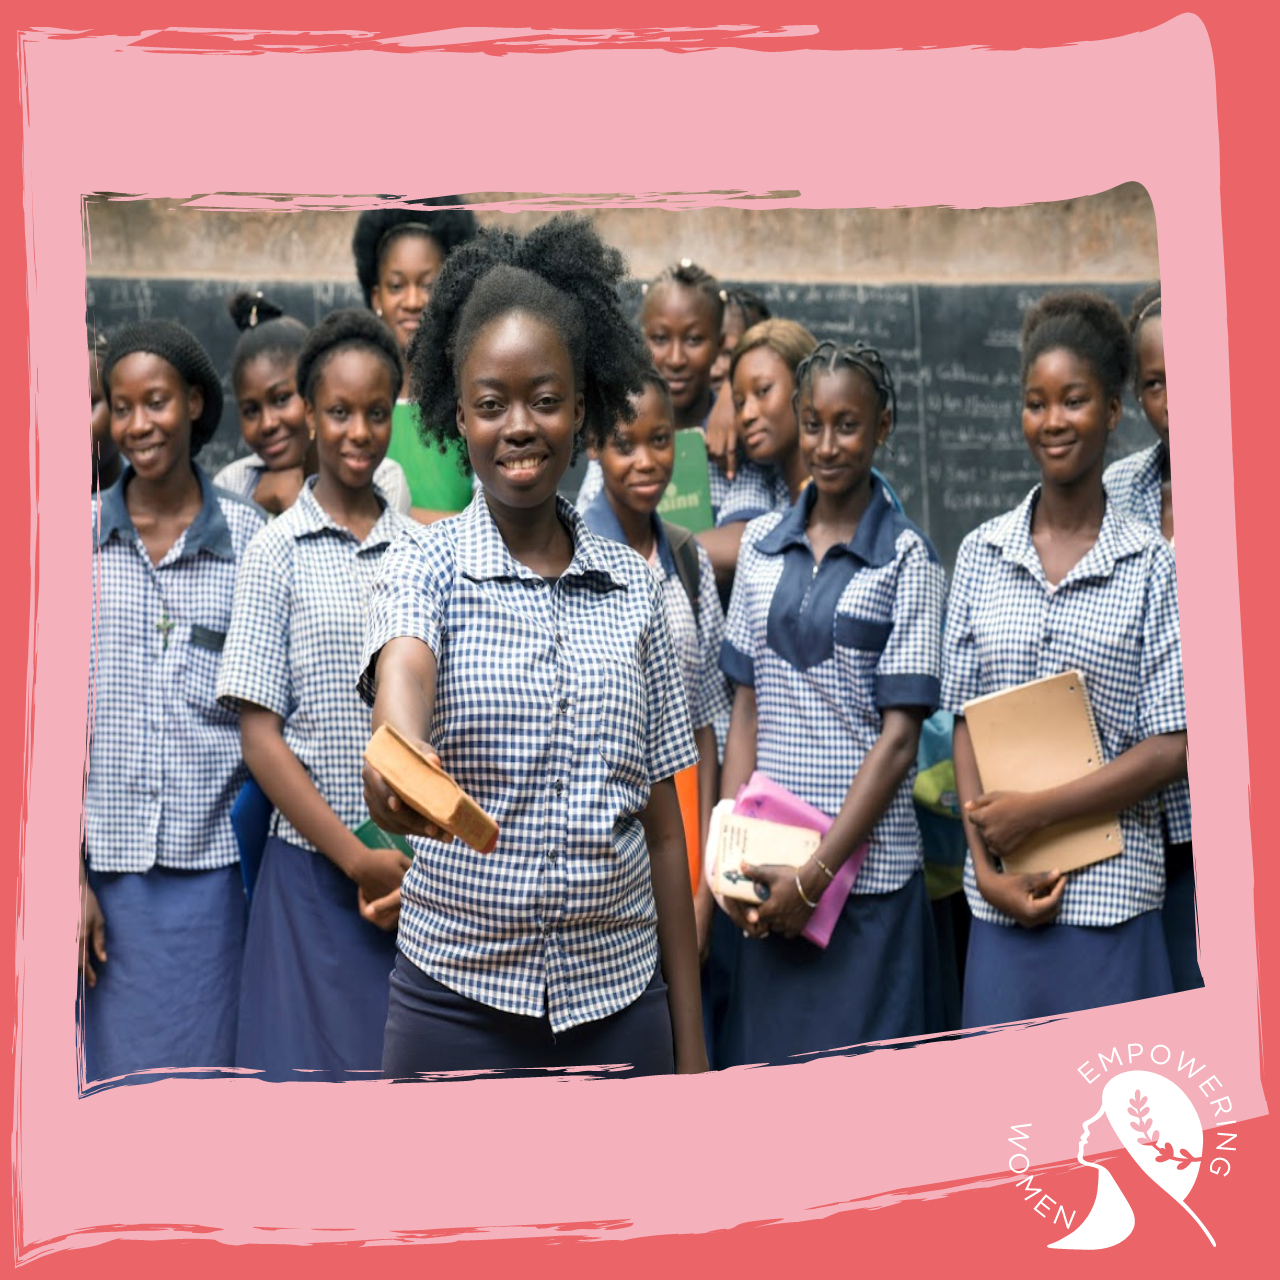 In 2017, The Foundation engaged with UNICEF to support the enrollment of 450 girls throughout the post-primary (middle school) cycle. 